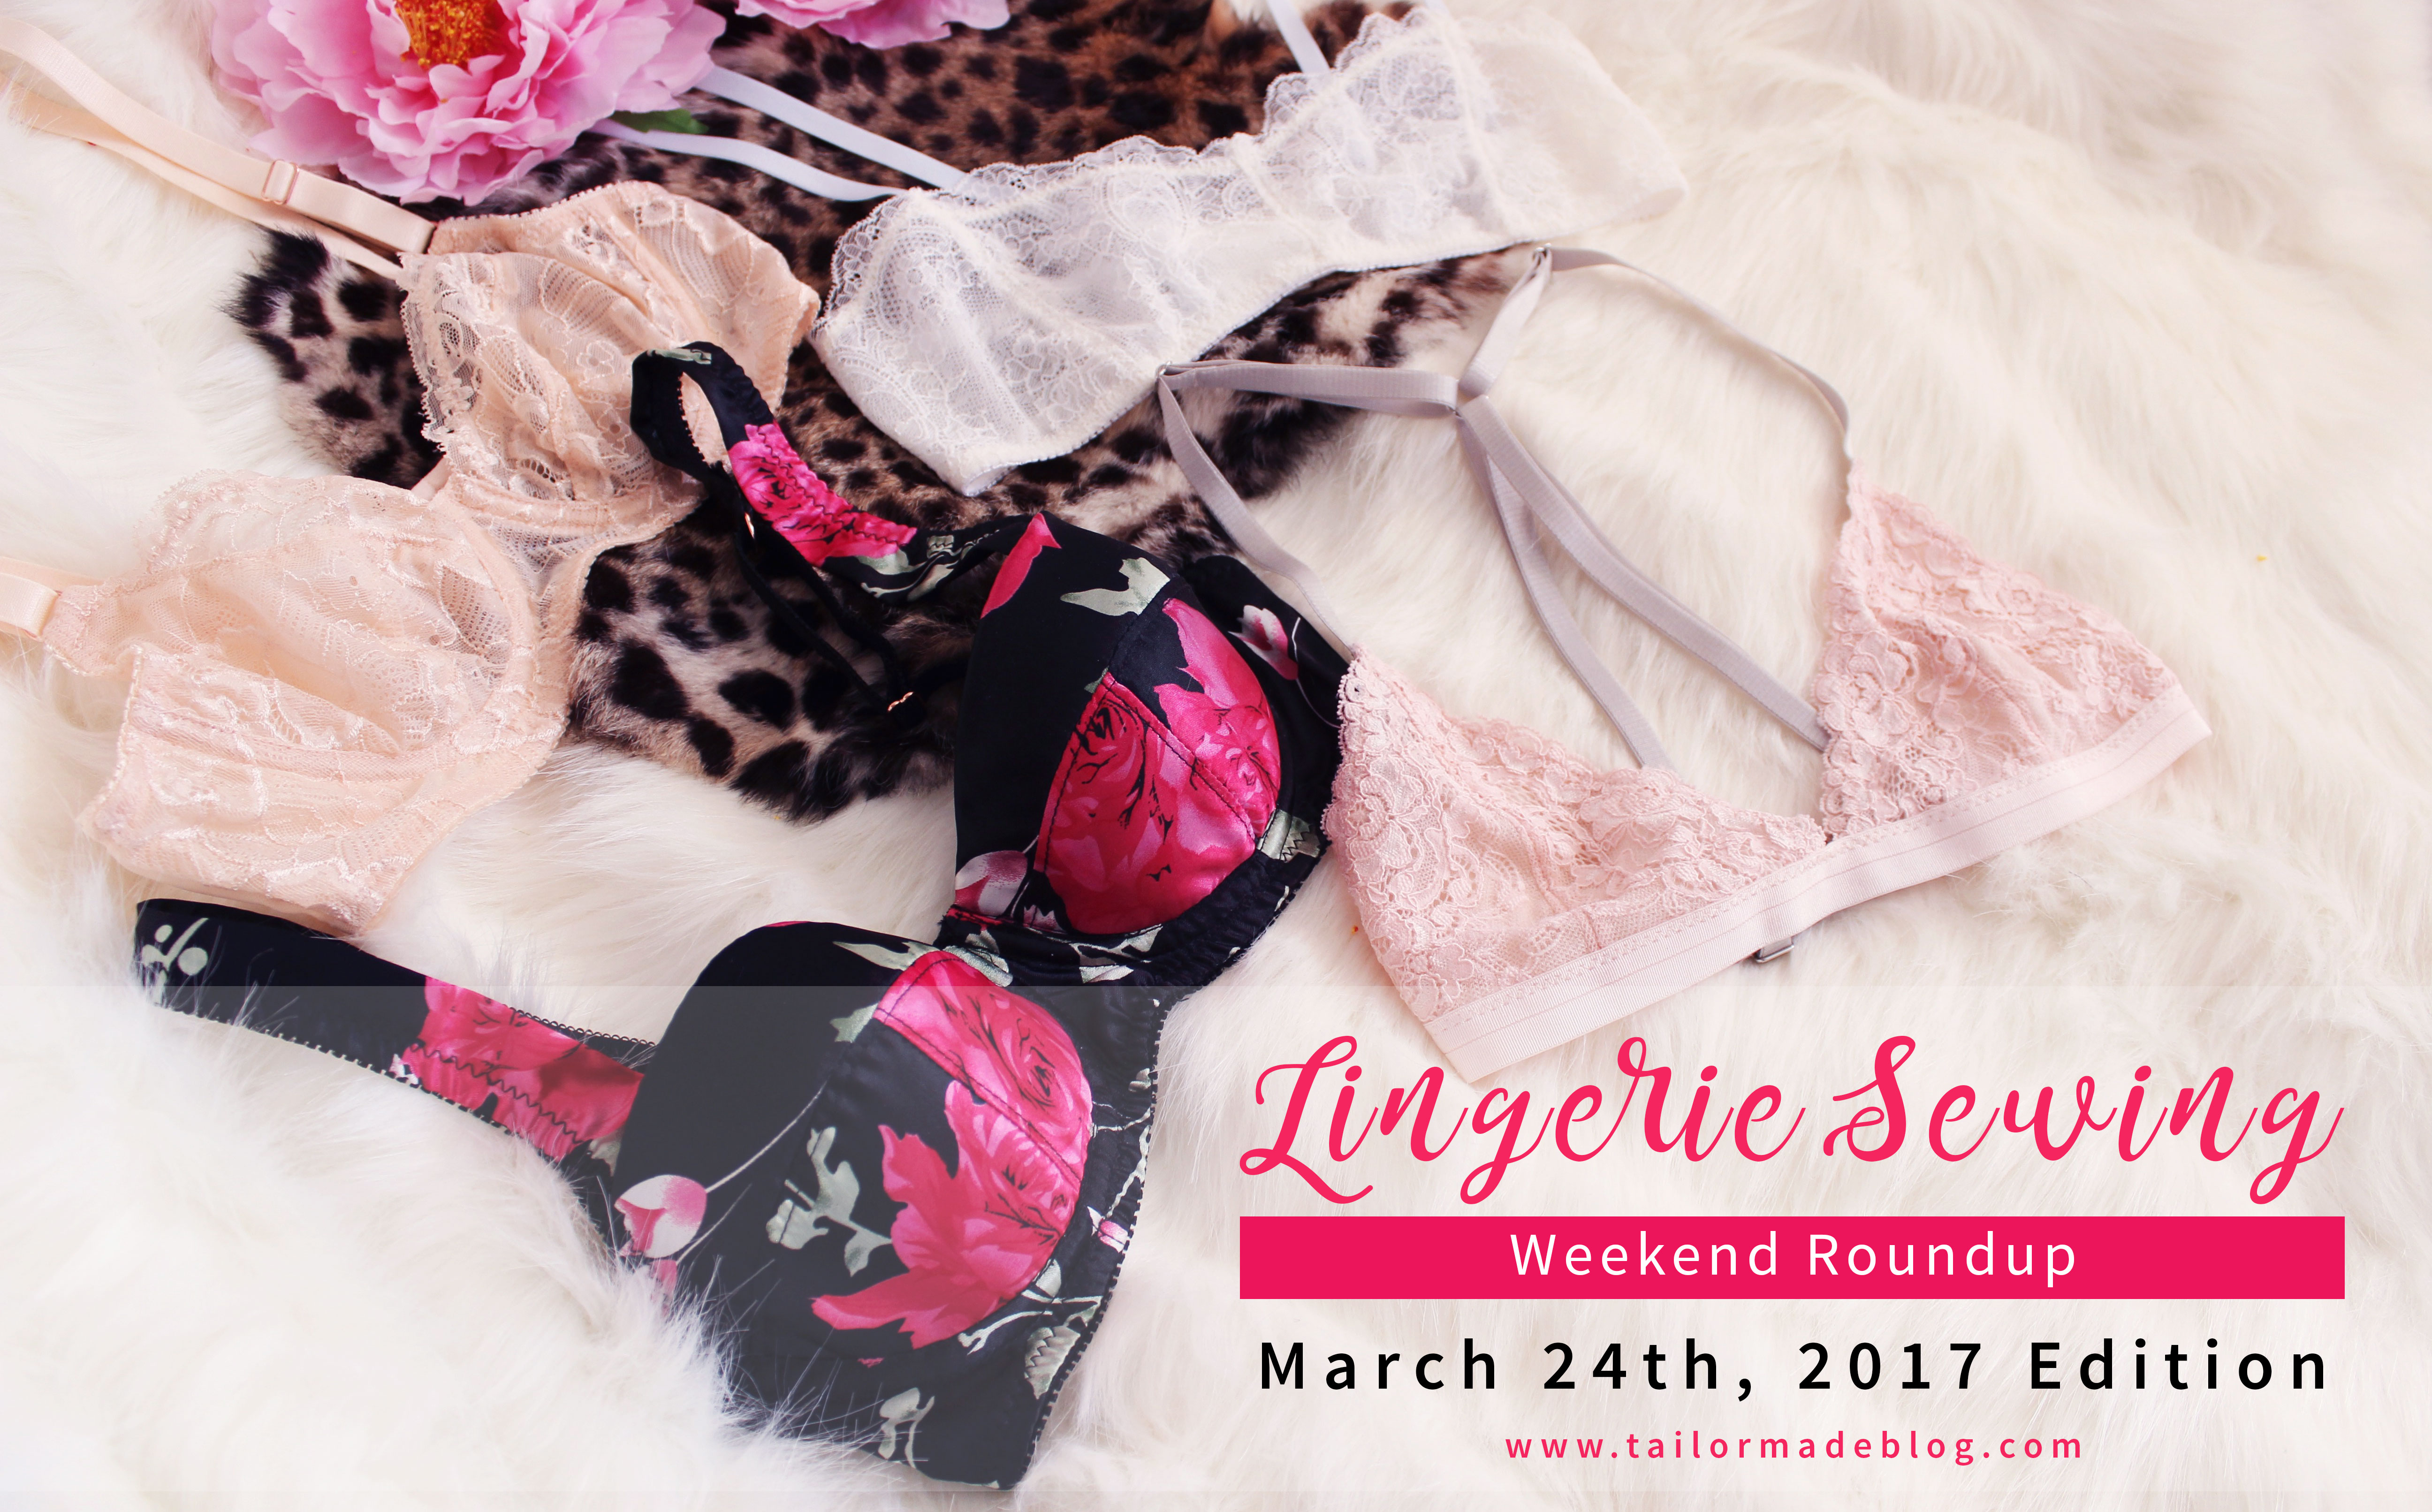 Lingerie Sewing Weekend Round Up Latest Bra Making News and Events